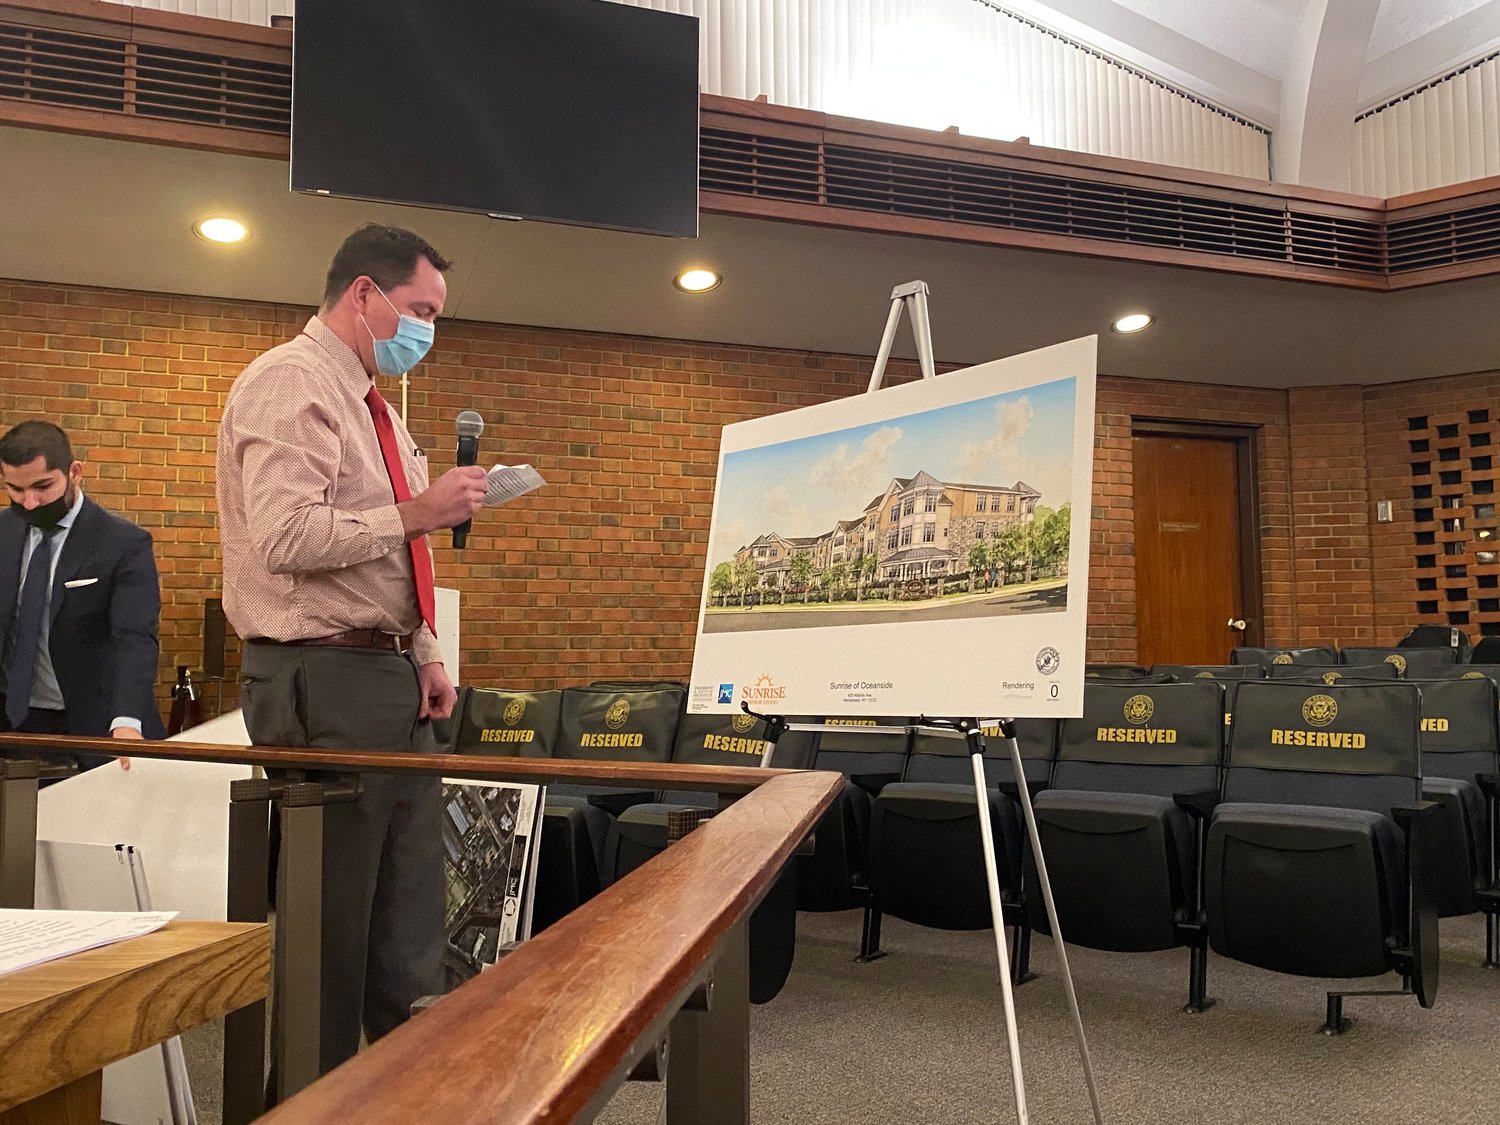 Andy English, project manager at ECA Architects, presented mock-ups of the proposed Sunrise Building.